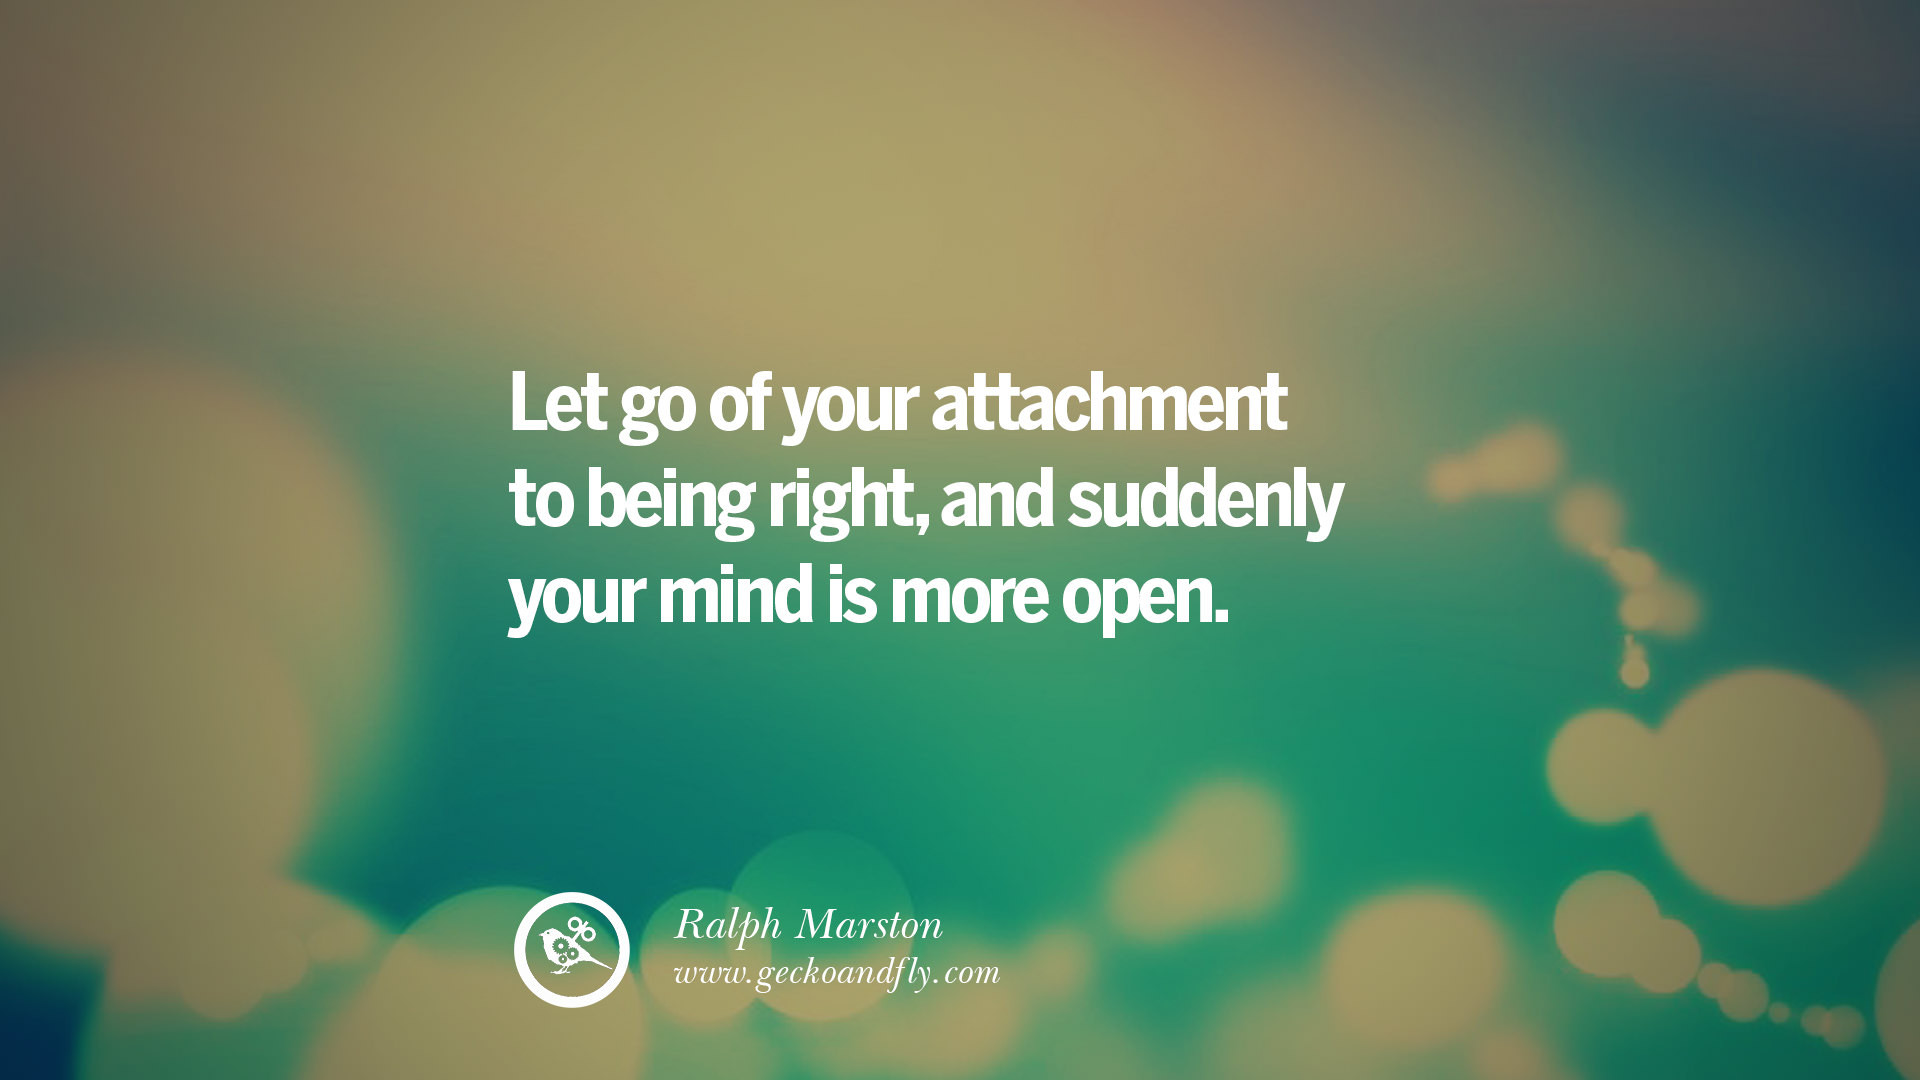 Letting Go Of A Relationship Quotes
 50 Quotes About Moving And Letting Go Relationship